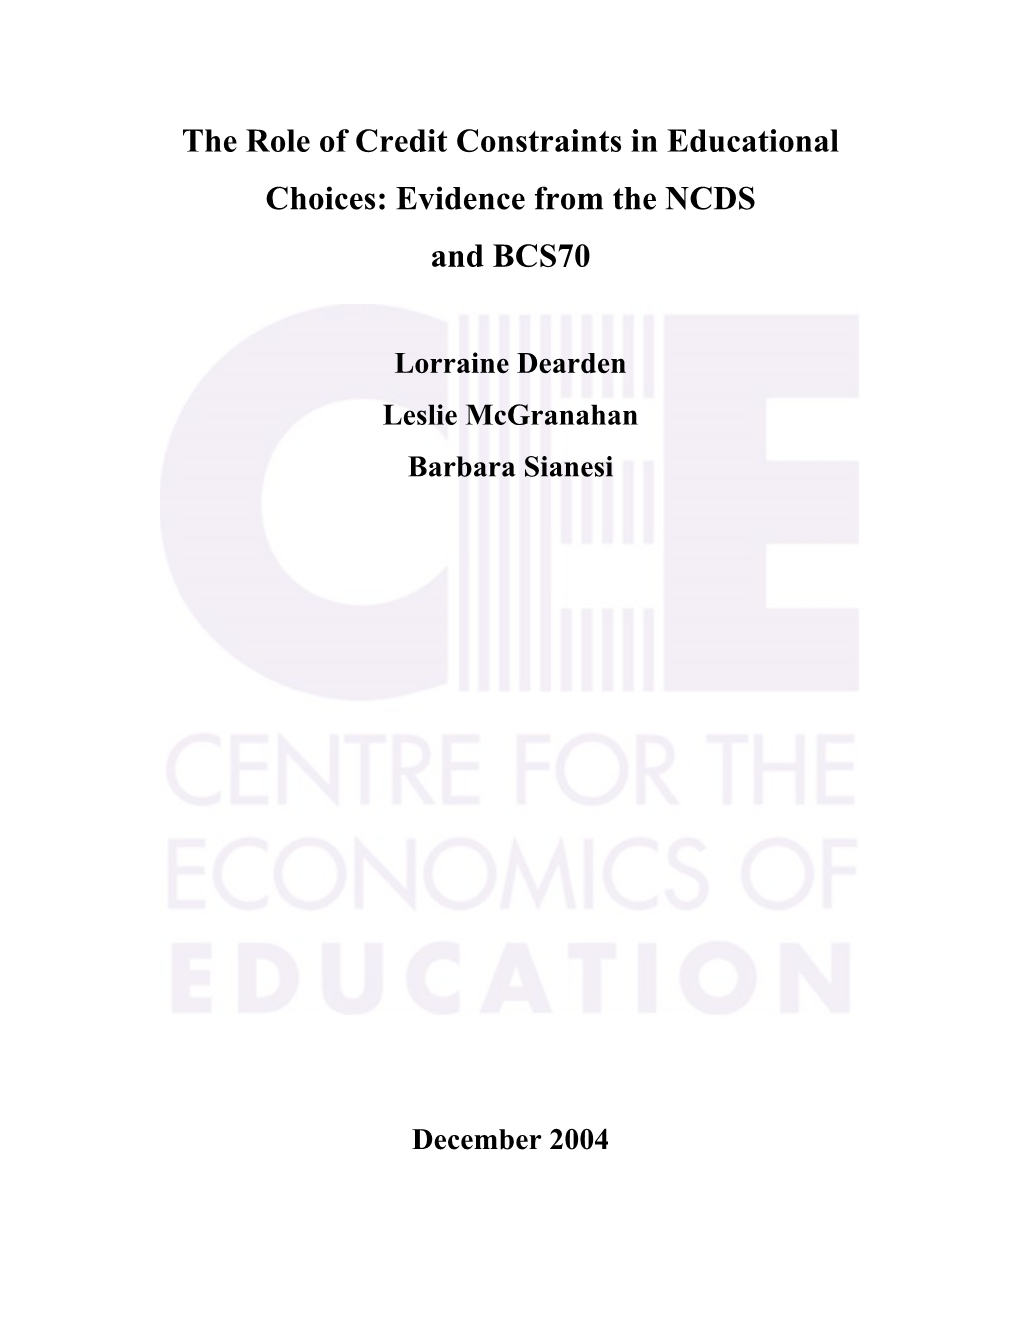 The Role of Credit Constraints in Educational Choices: Evidence from the NCDS and BCS70